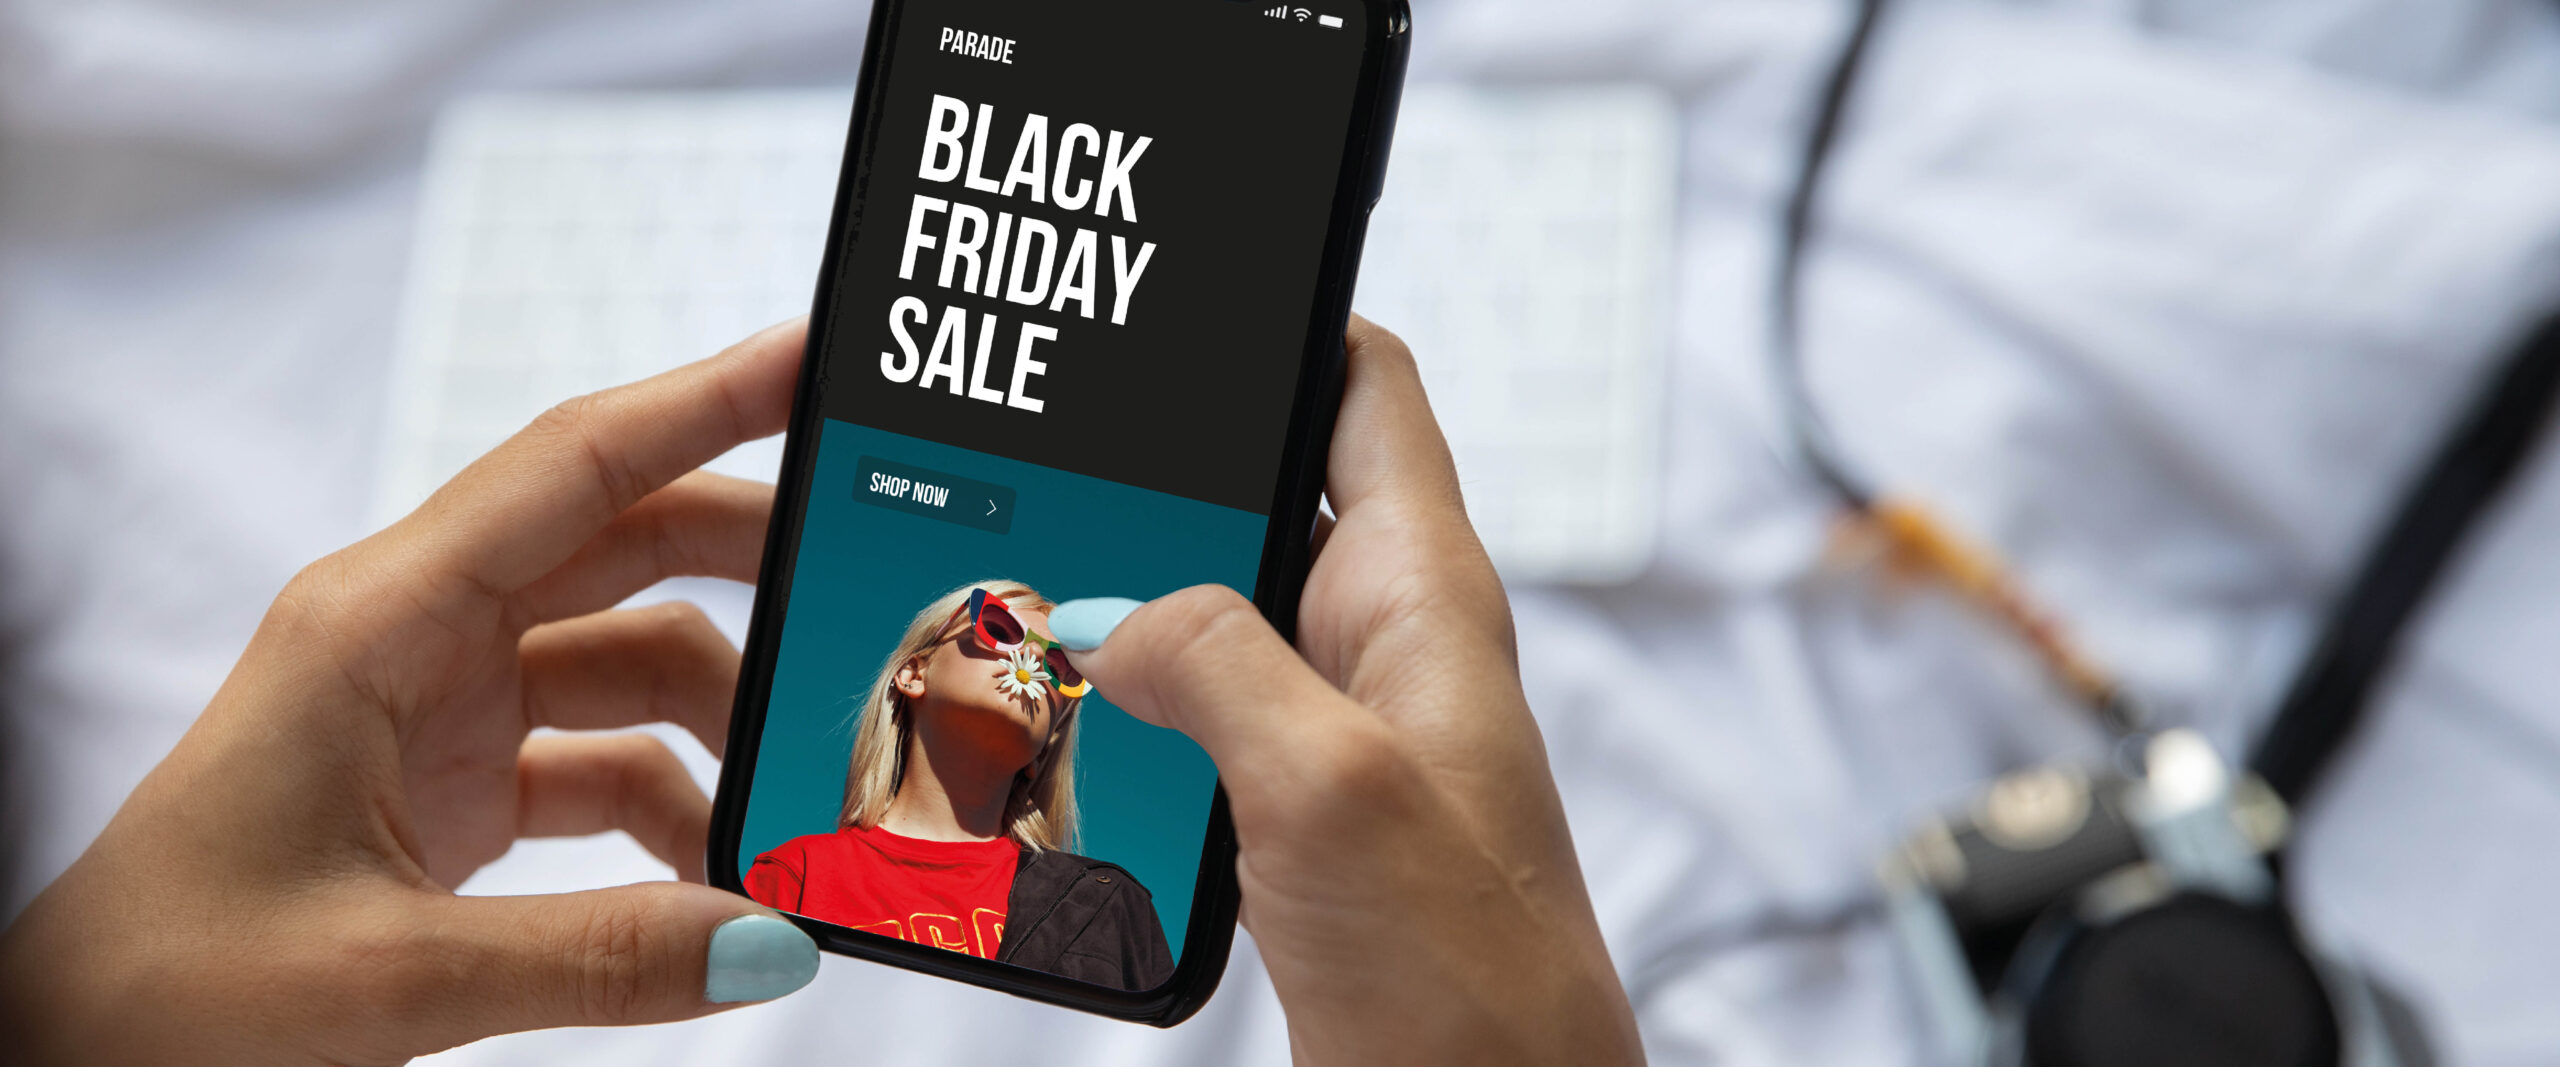 11 top tips: Prepare your checkout to maximise Black Friday sales